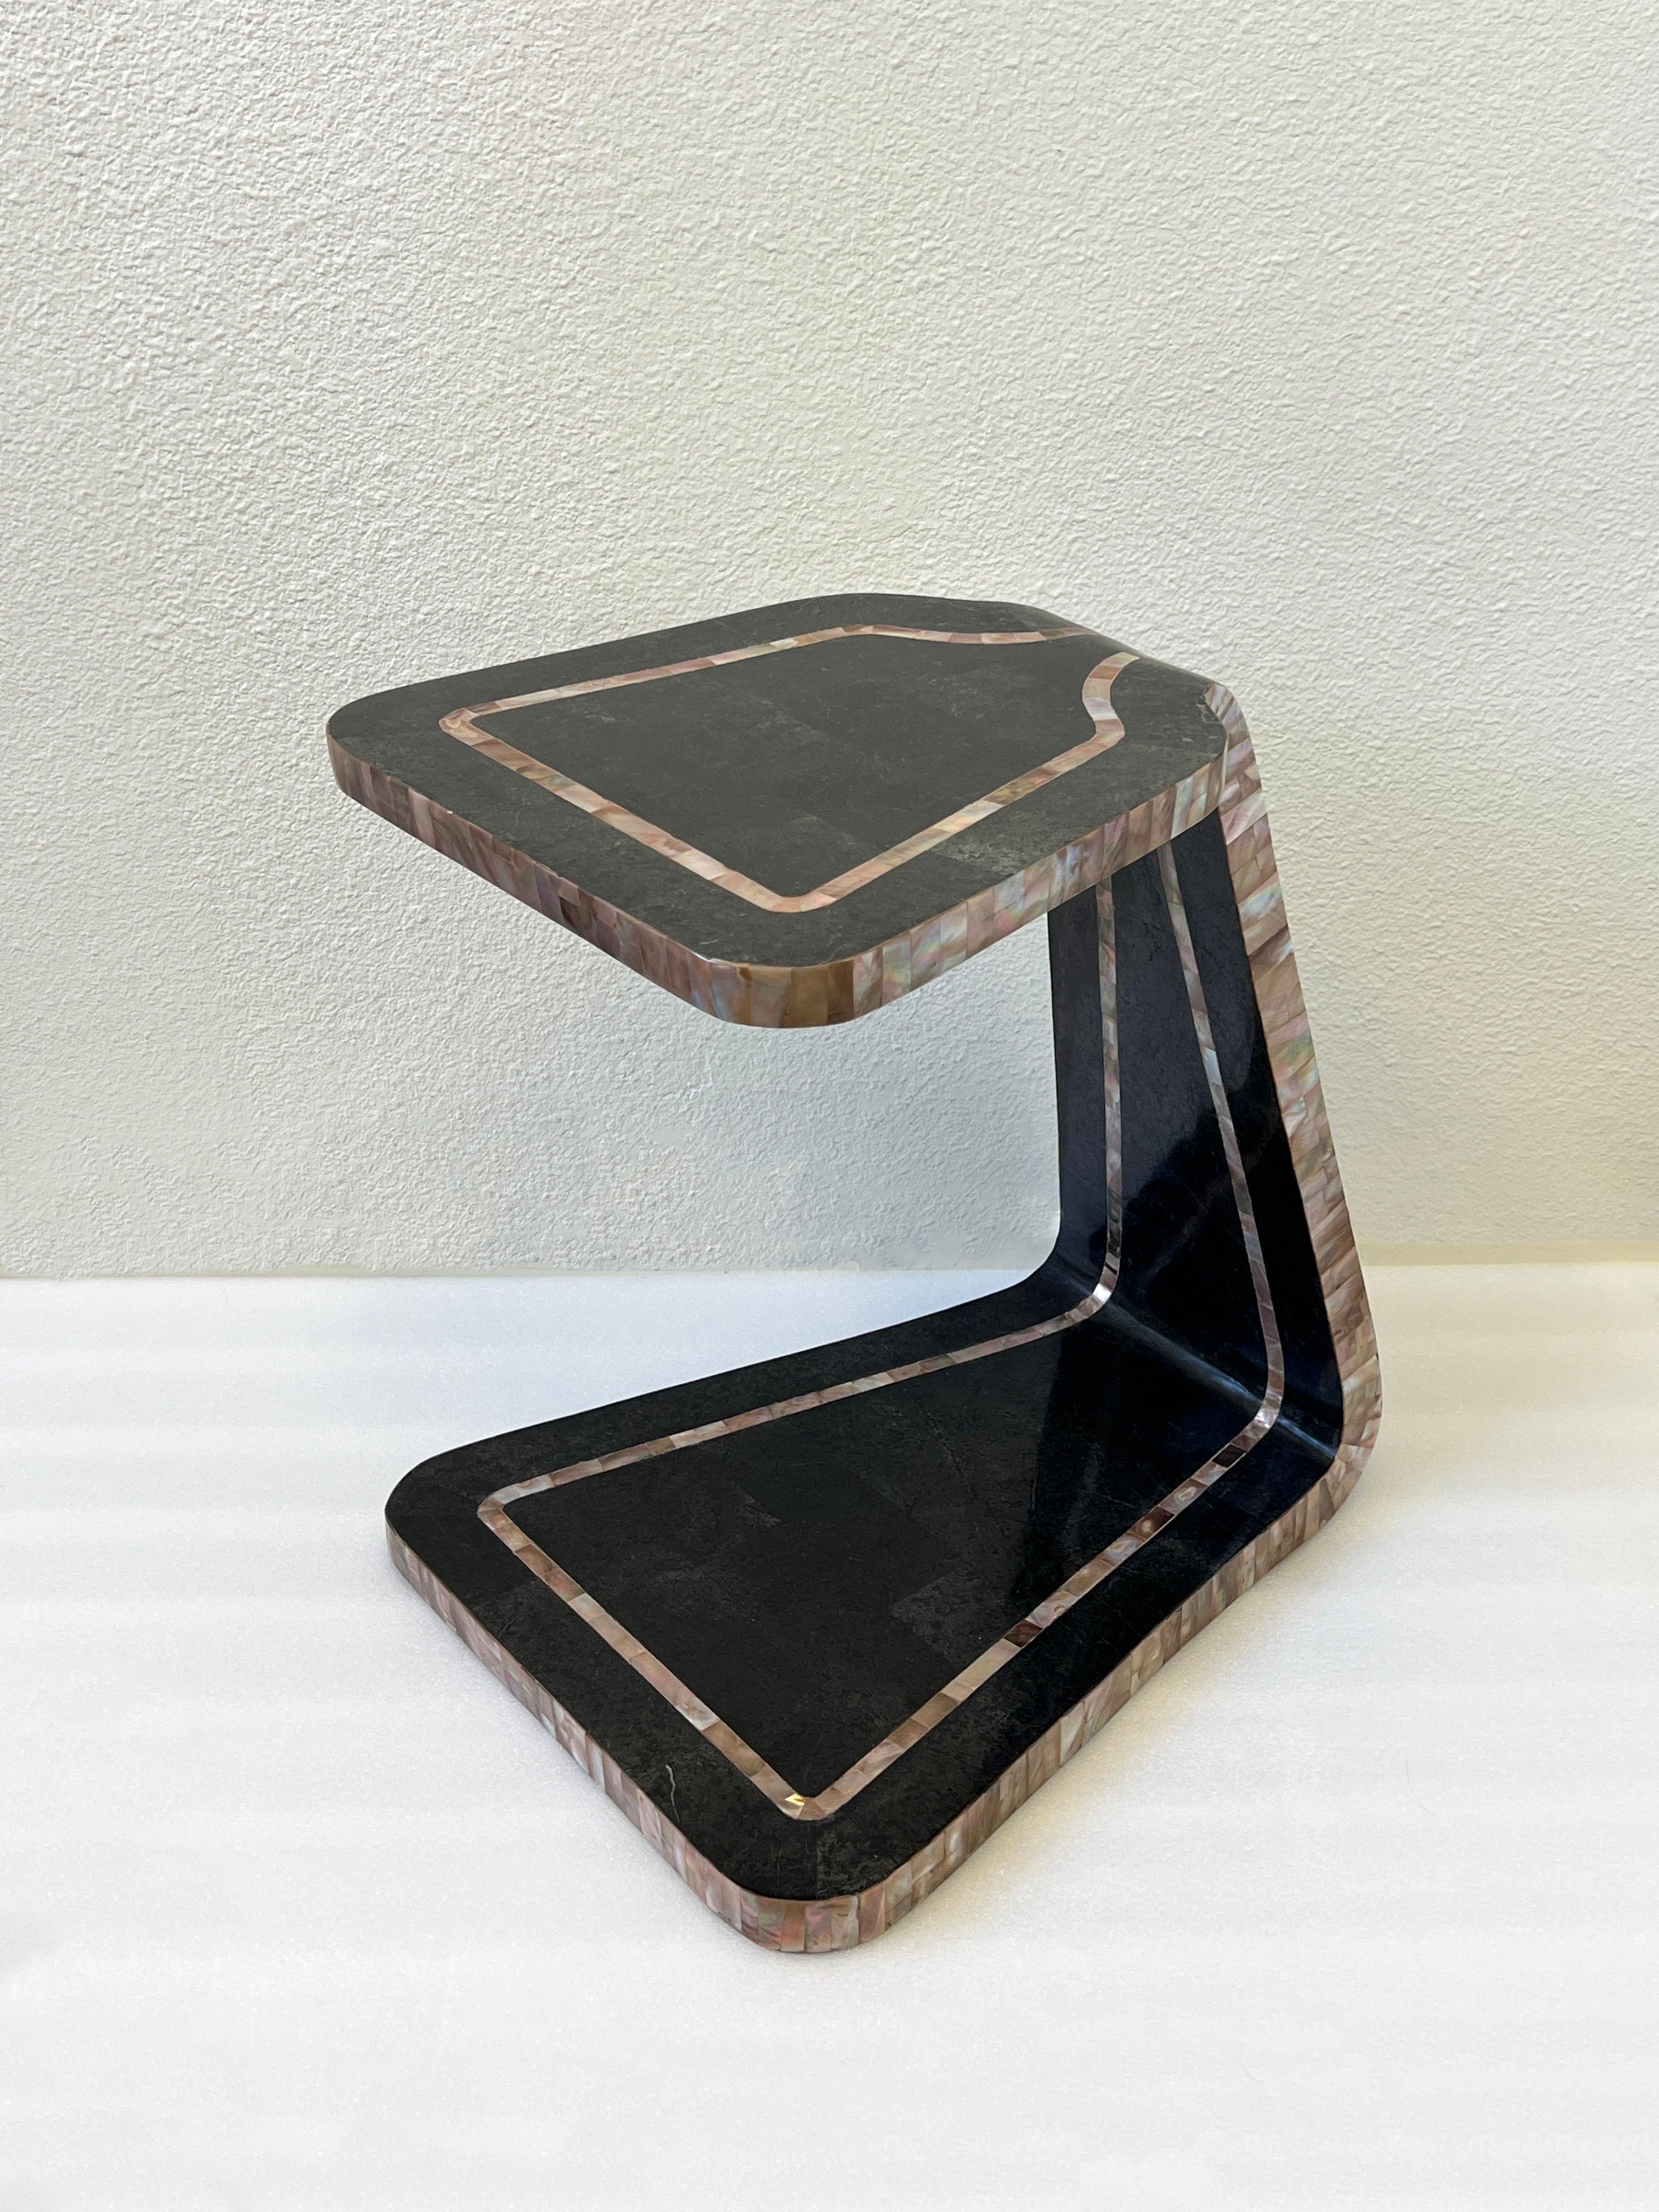 1980’s Sculptural occasional side table by Marquis collection of Beverly Hills. 
Constructed of wood covered with tessellated black marble and pink abalone shell.
Measurements: 19” High, 15” Wide, 18.25” Deep.